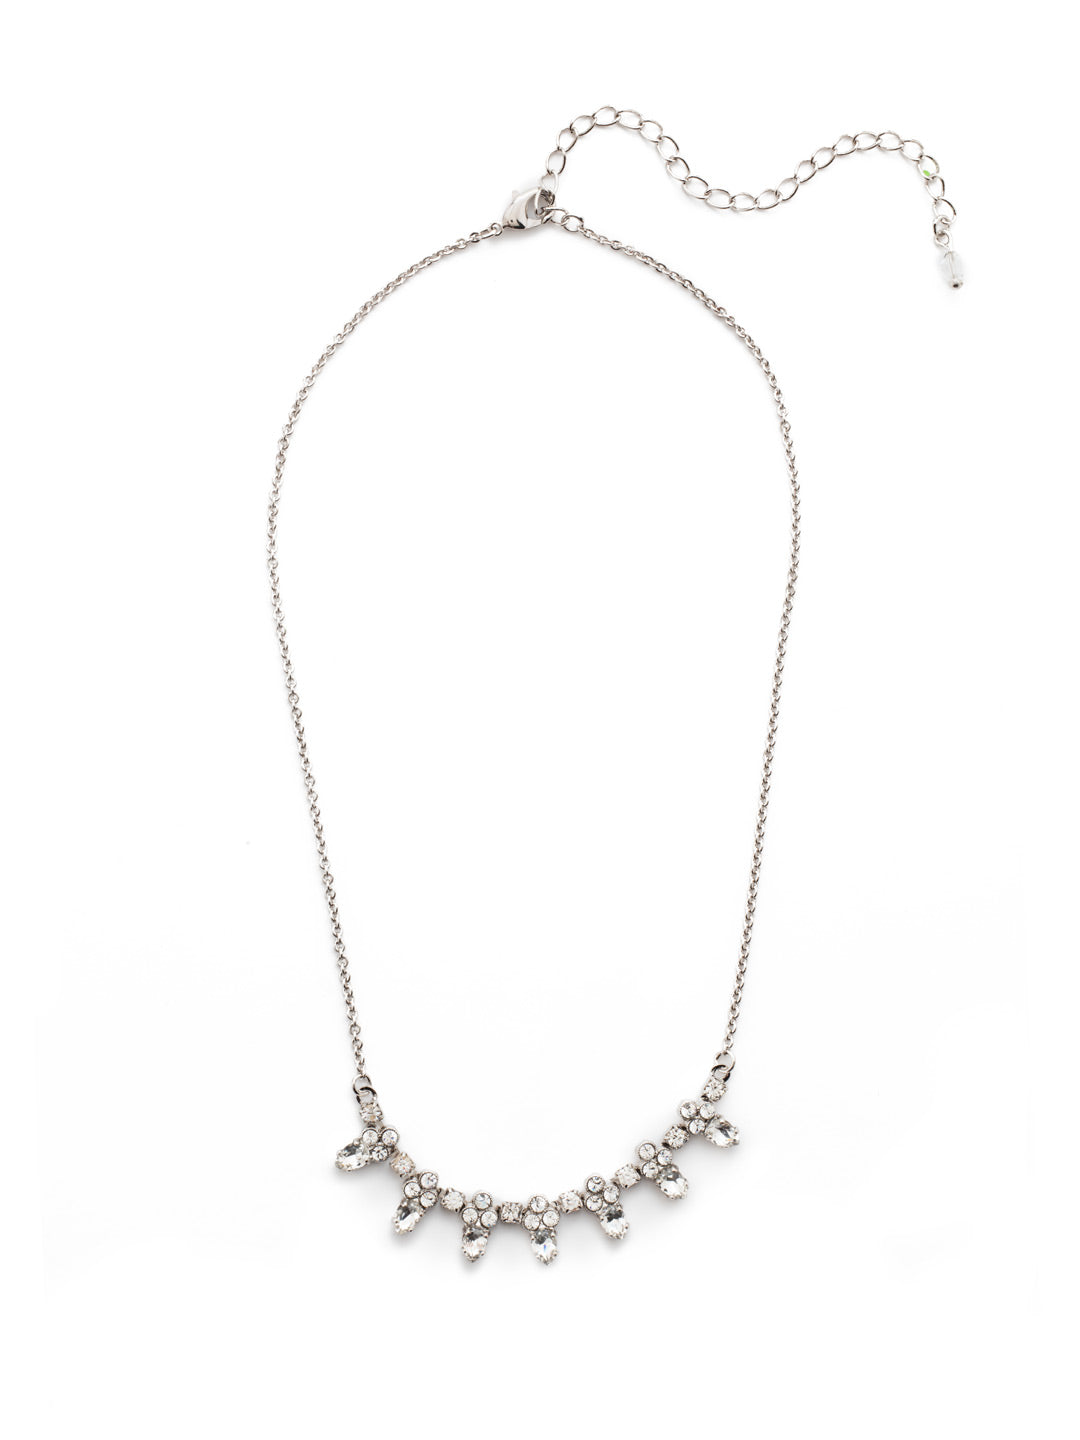 Twinkling Thistle Tennis Necklace - NDN46RHCRY - <p>A row of shimmering navette stones peek out from their delicate crystal setting in this half line design. From Sorrelli's Crystal collection in our Palladium Silver-tone finish.</p>